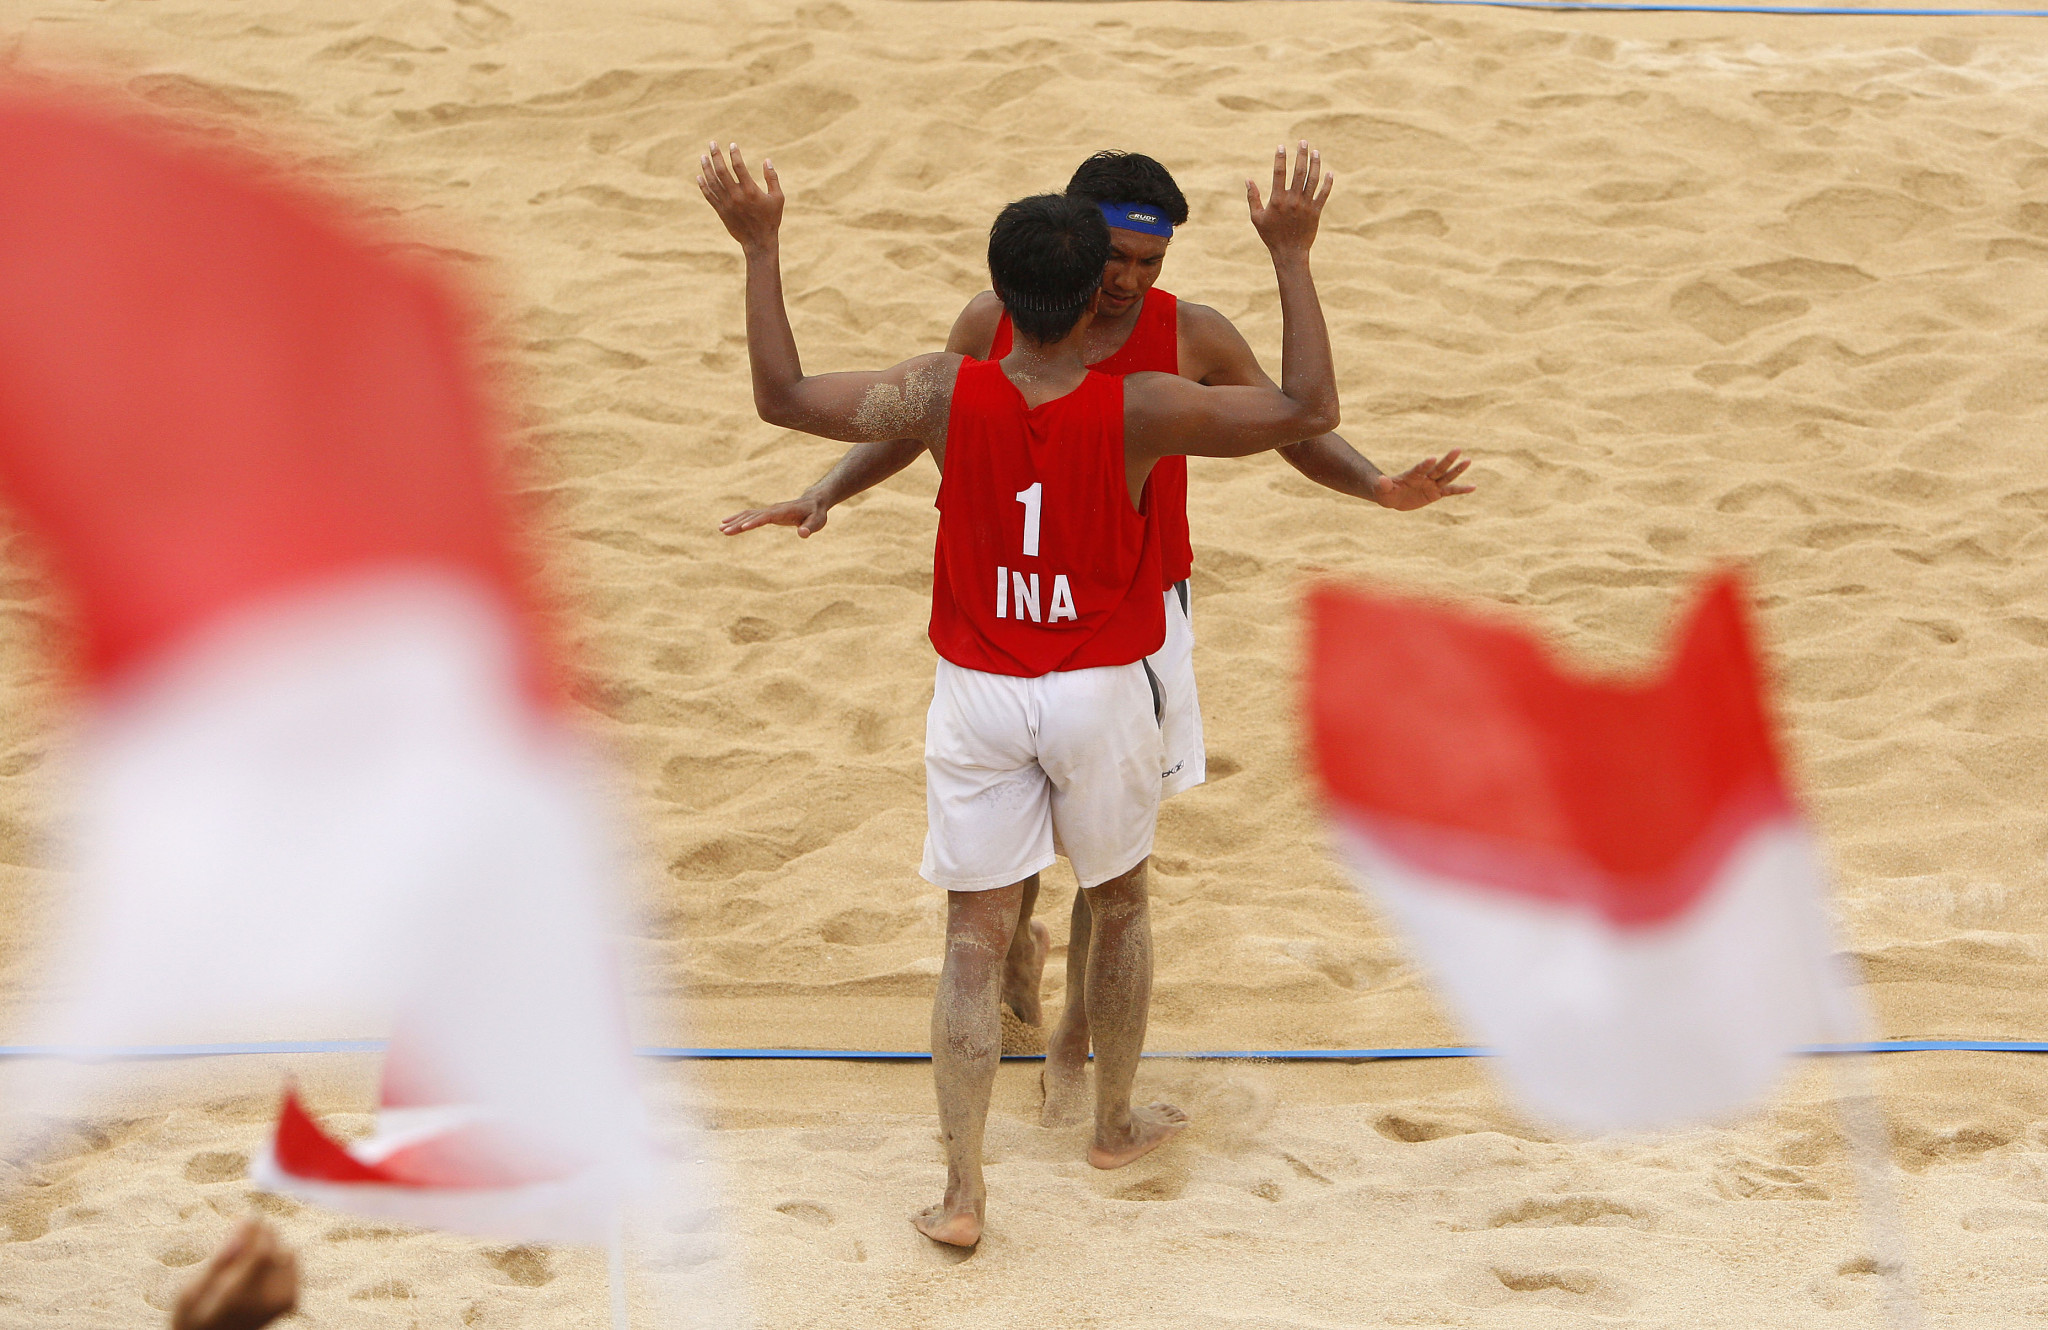 Bali is set to host the 2023 ANOC World Beach Games ©Getty Images